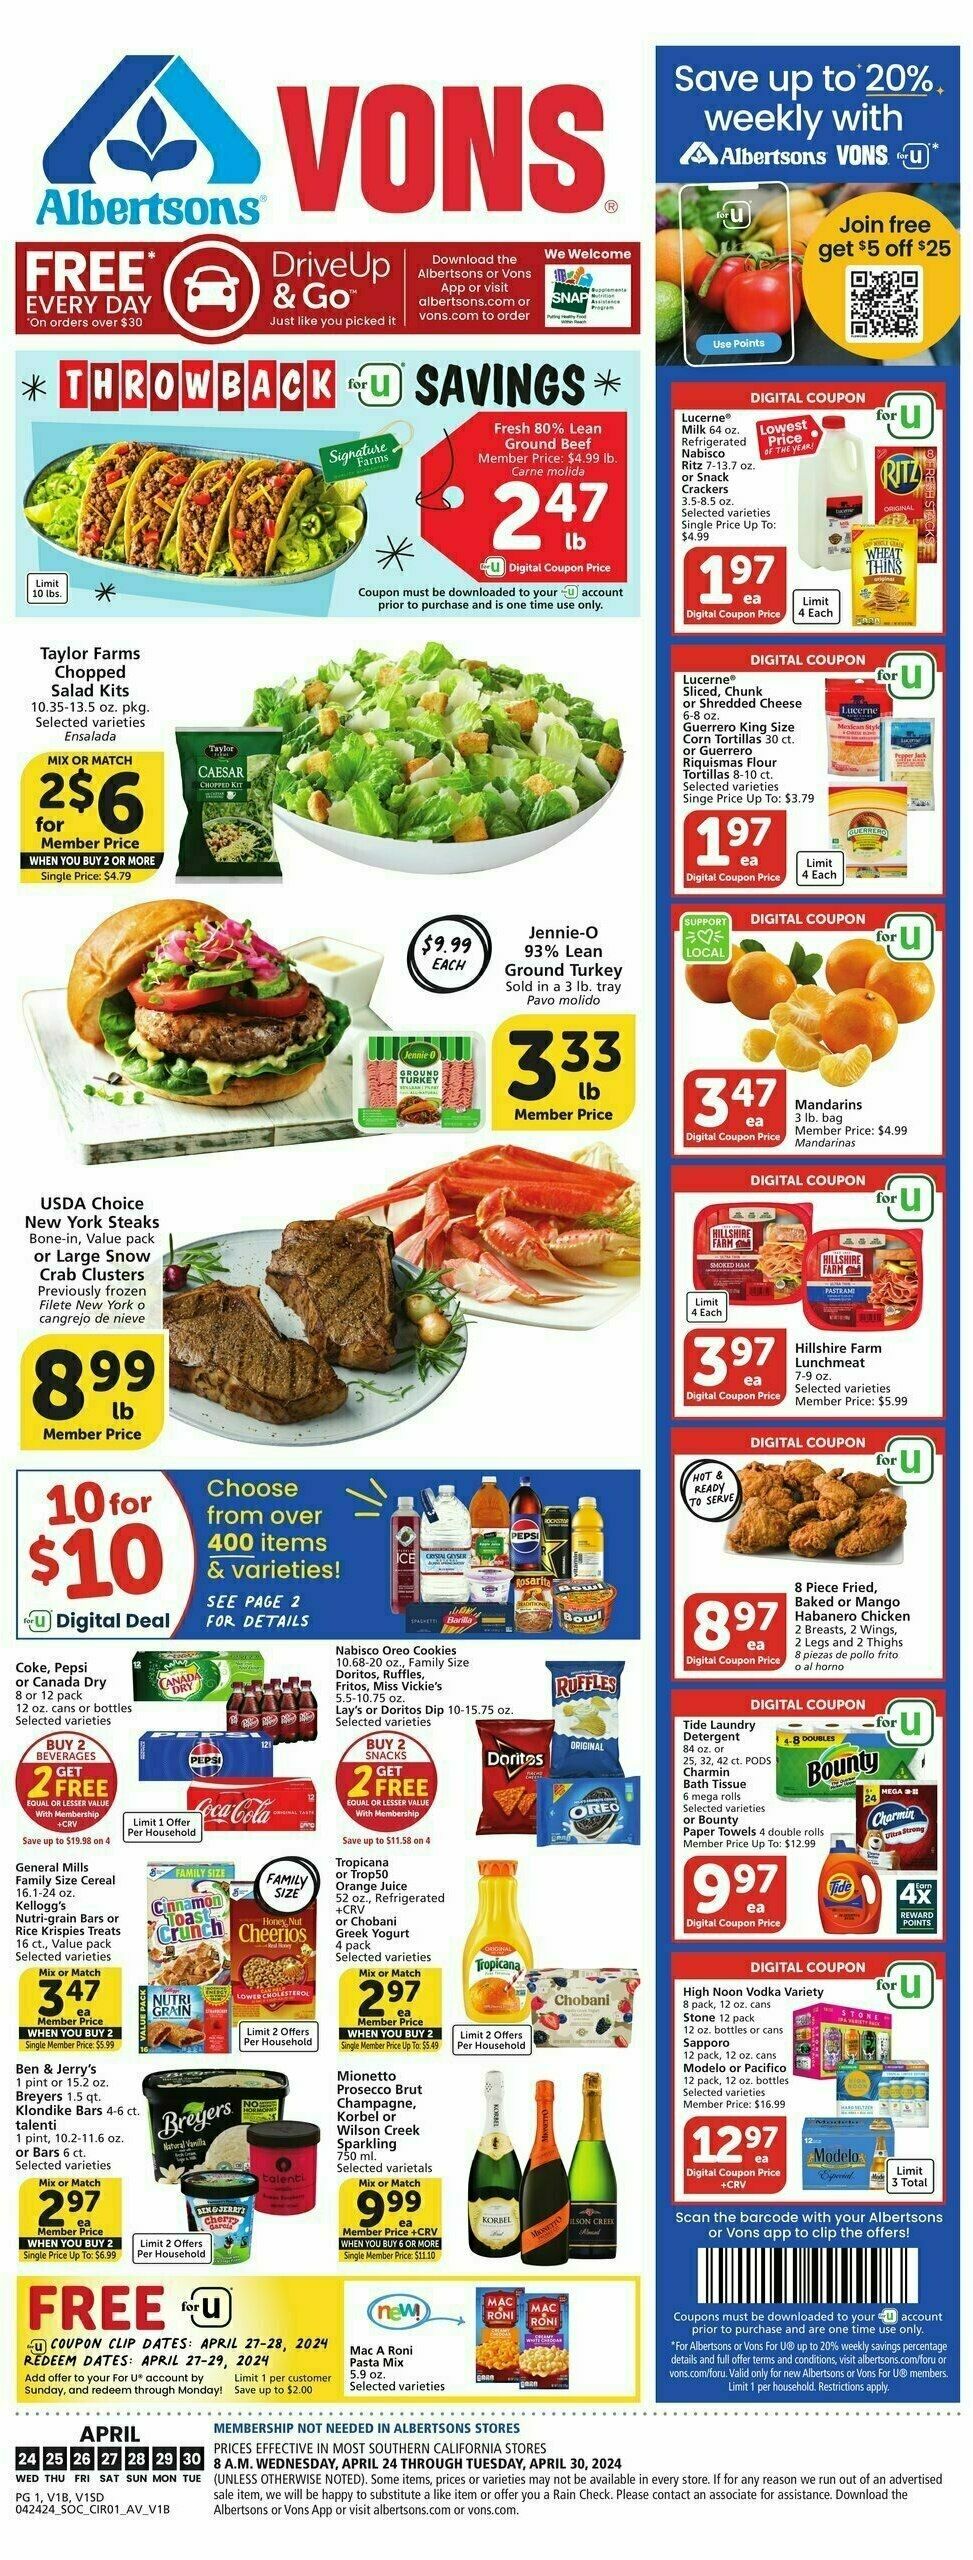 Vons Weekly Ad from April 24